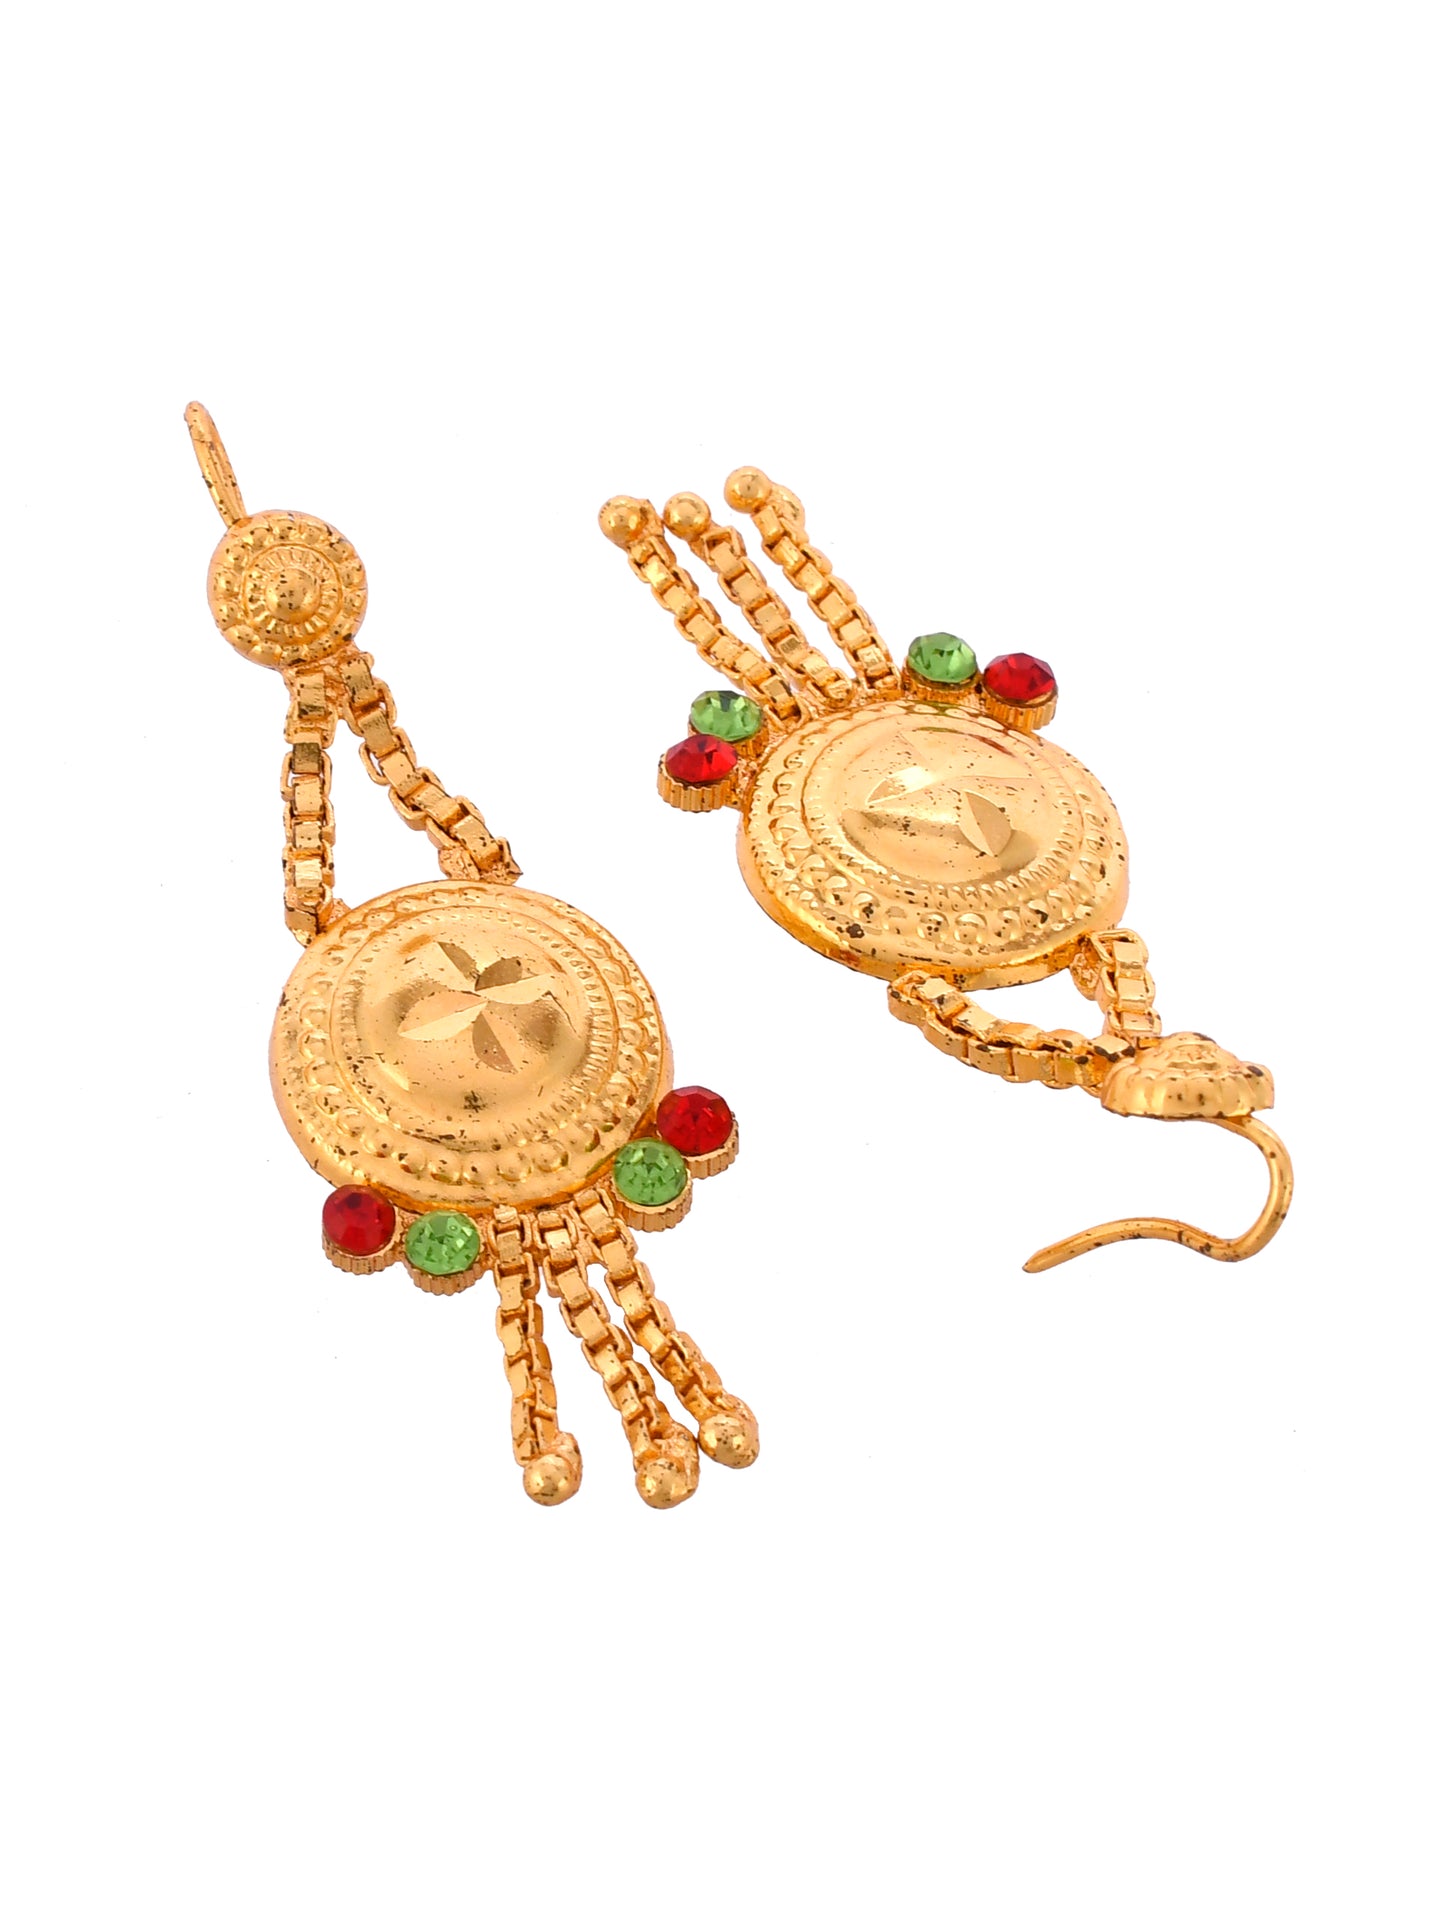 Gold Plating & Gold Toned Temple Jewellery Set